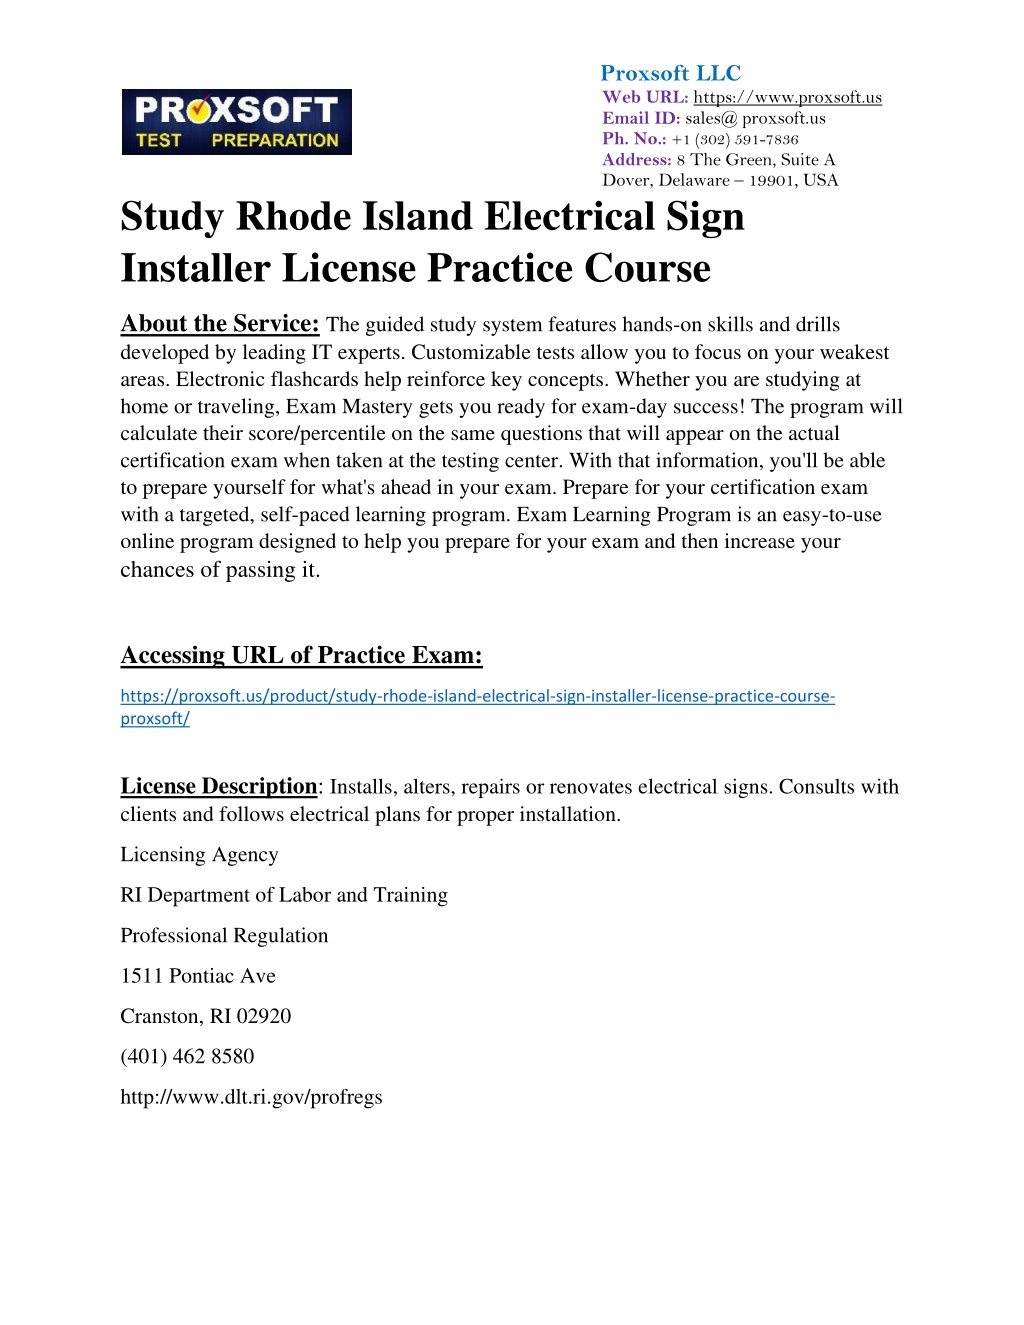 Rhode Island residential appliance installer license prep class download the new